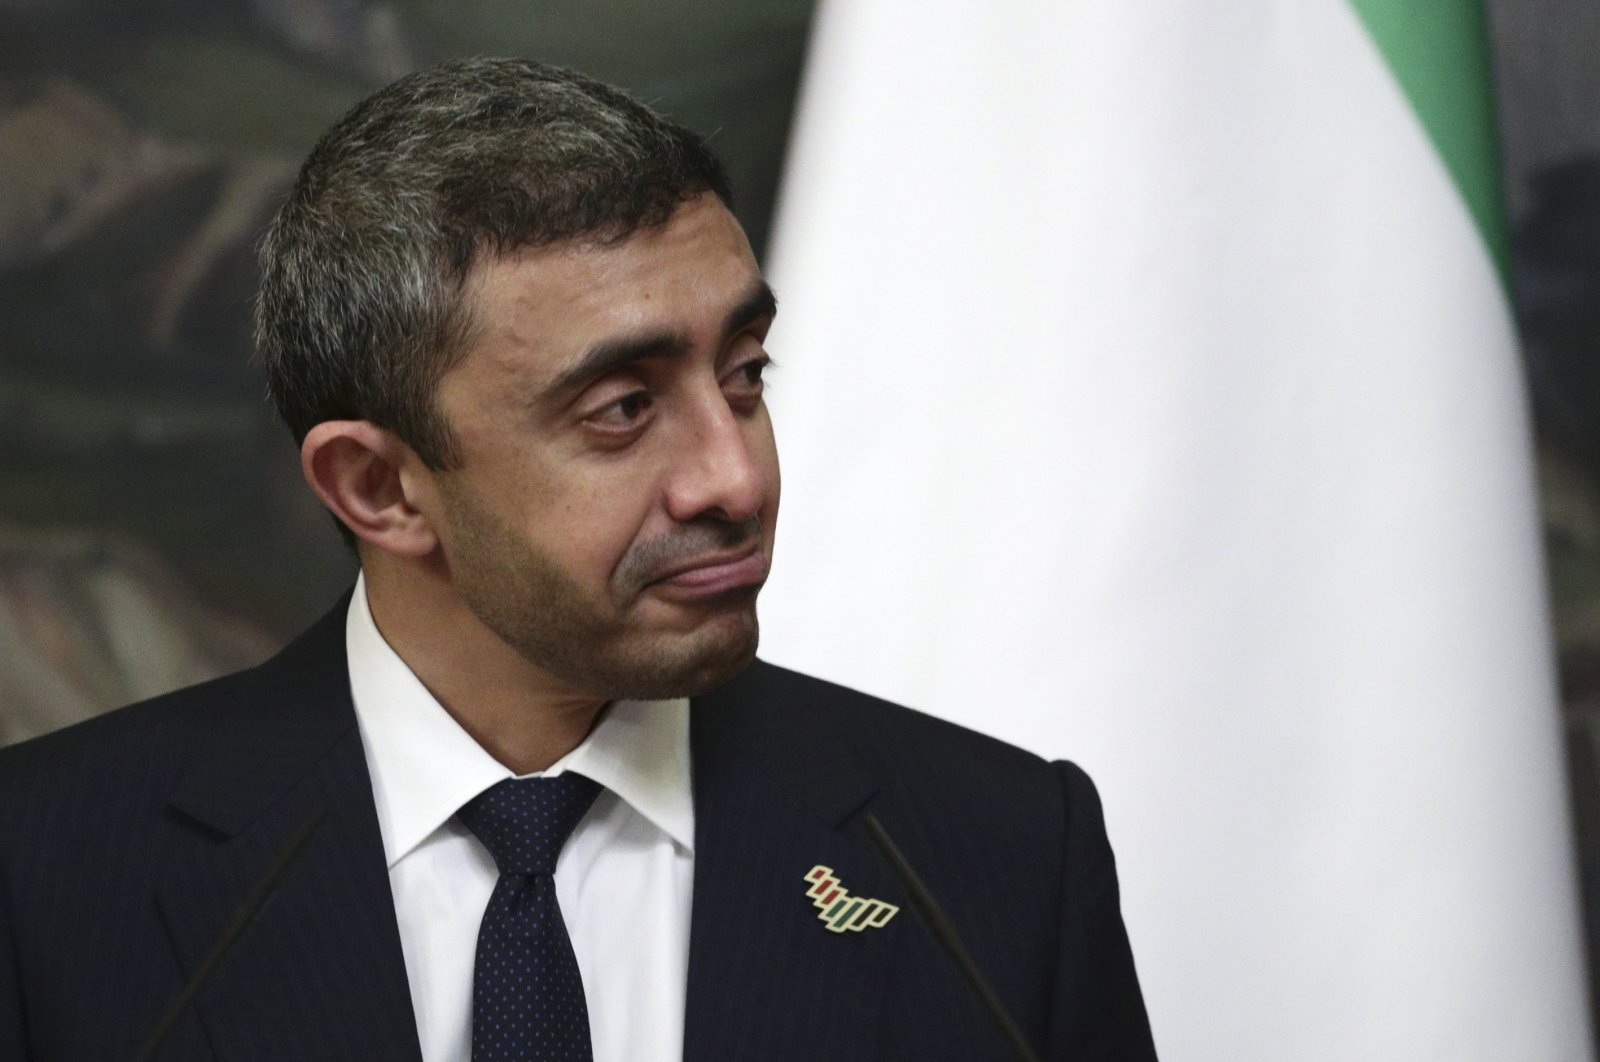 UAE Foreign Minister Abdullah bin Zayed Al-Nahyan attends a joint press conference with his Russian counterpart following their talks in Moscow on Dec. 14, 2020. (AFP Photo)